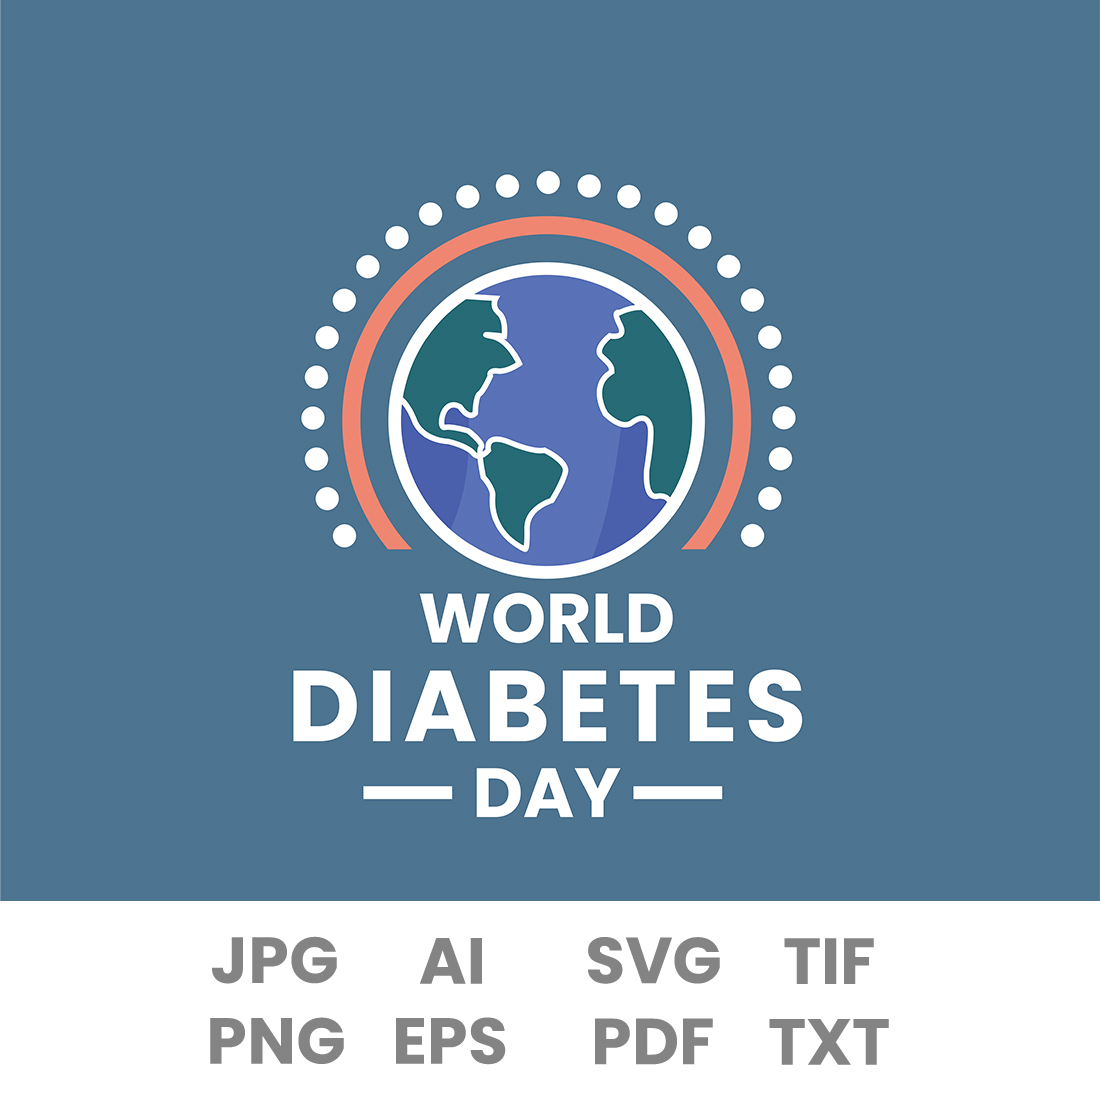 World diabetes day template cover image.